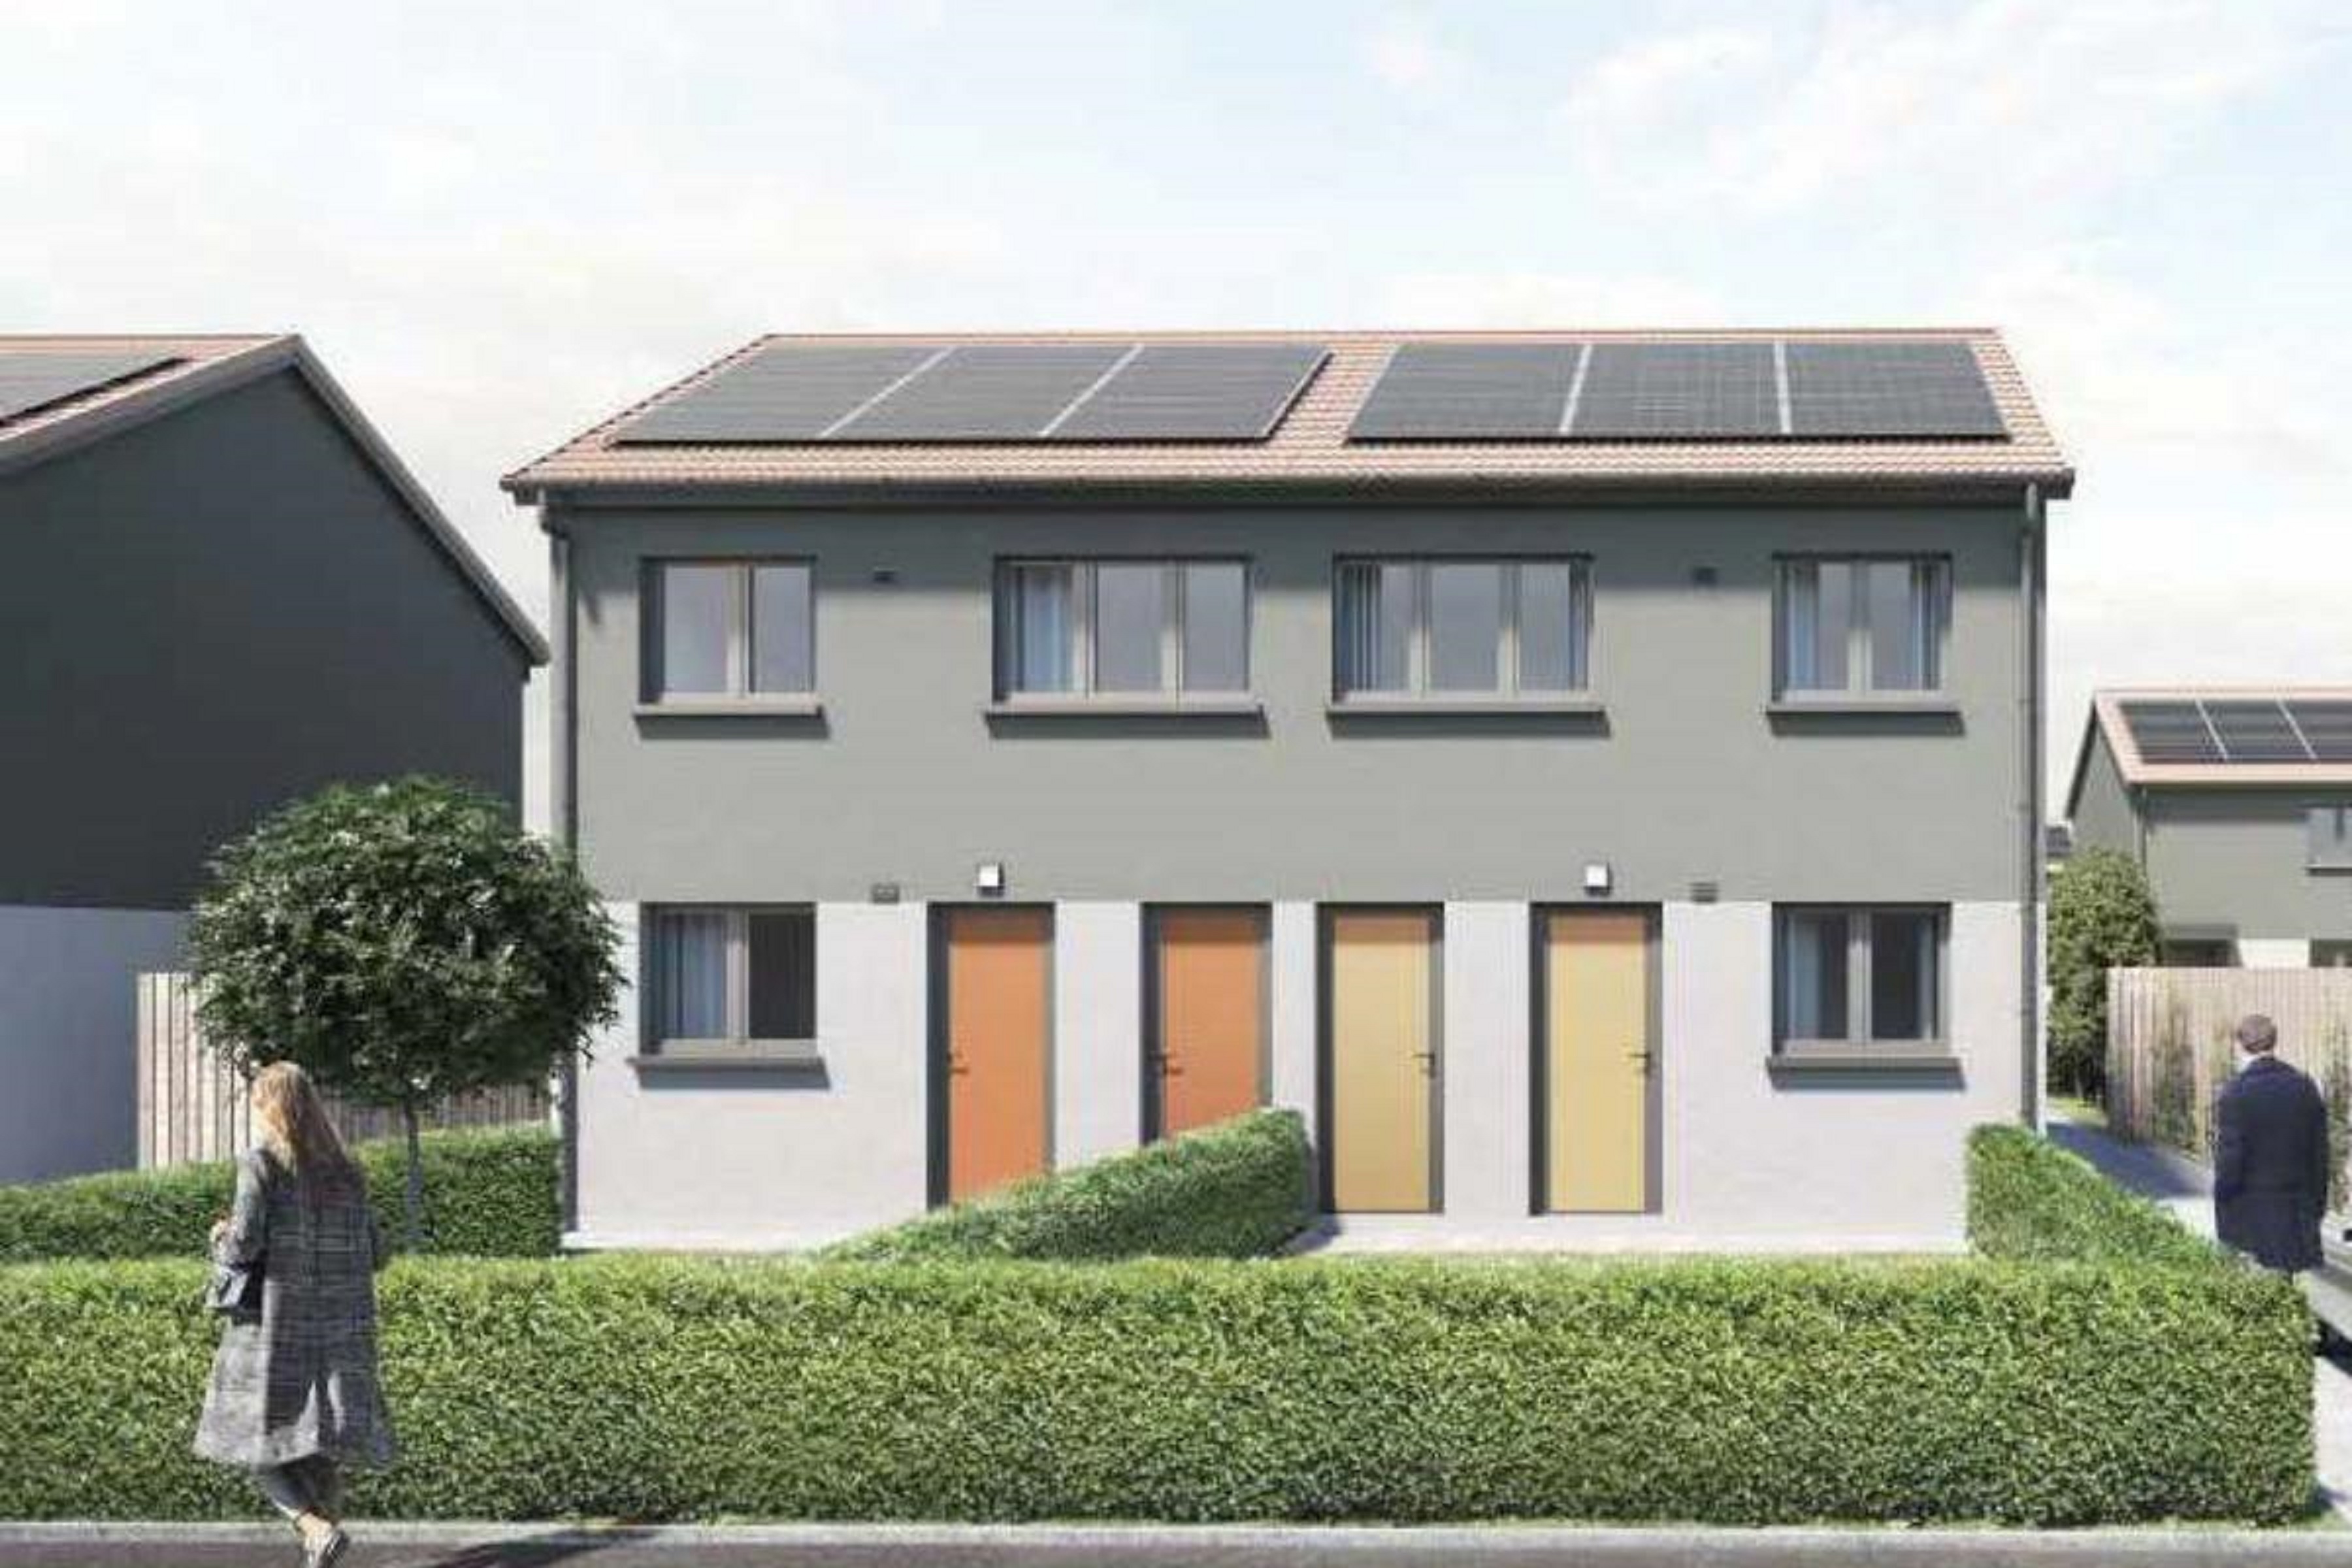 Wheatley Homes Glasgow starts work on new £1.6m project to reduce energy bills